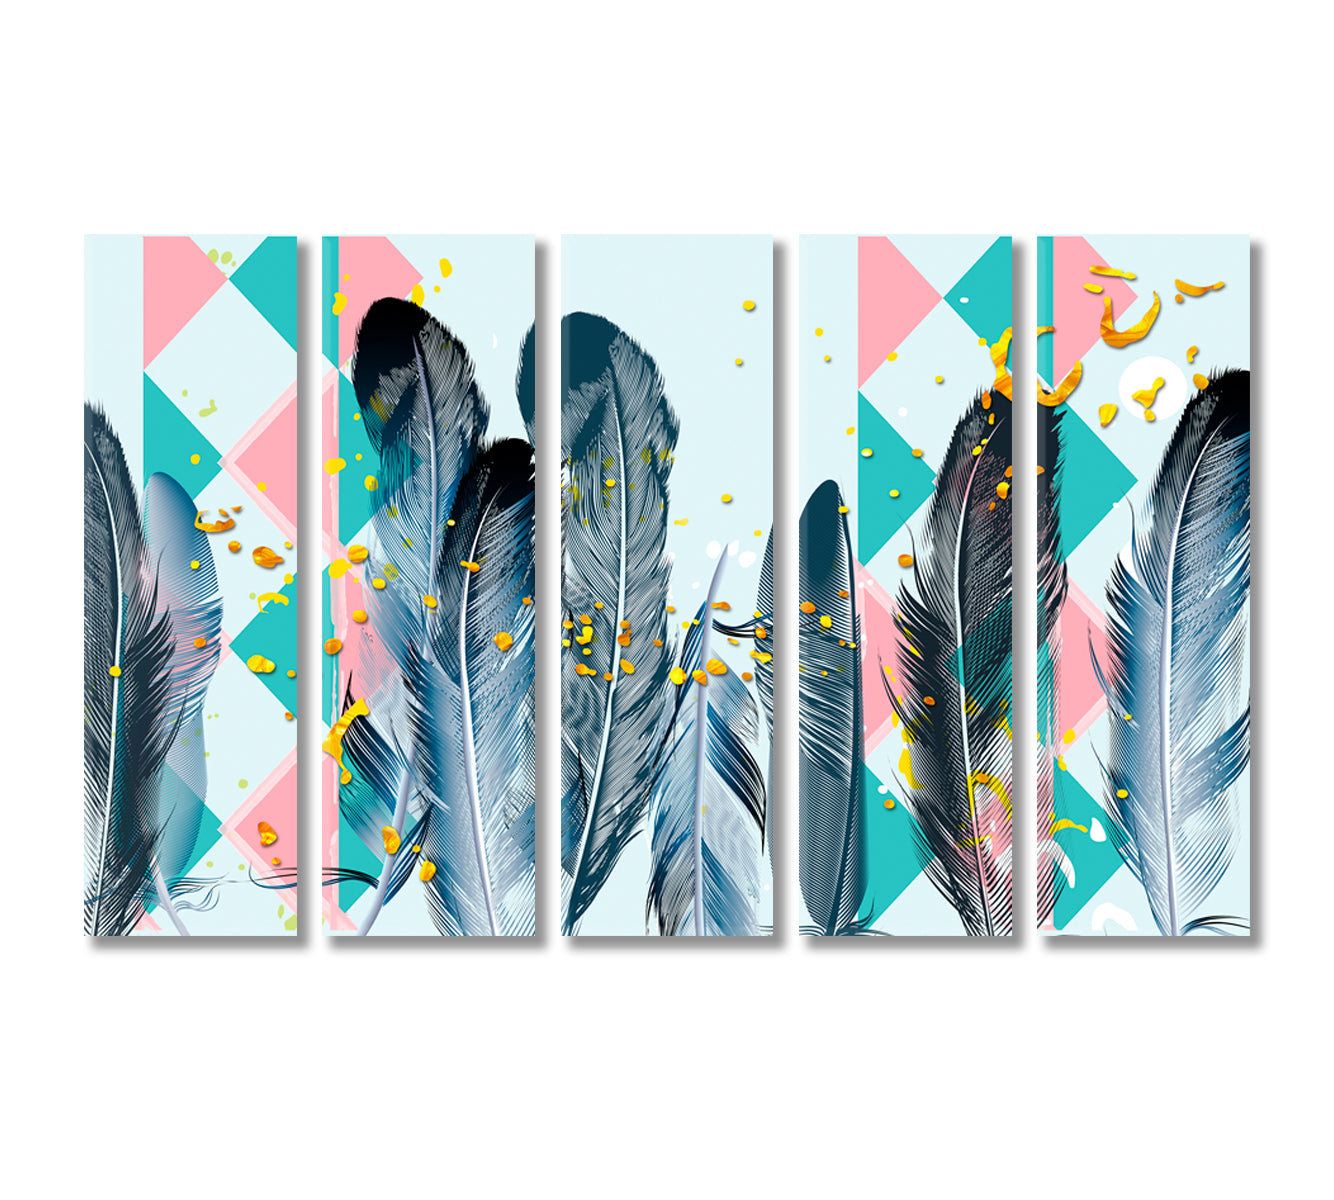 Feathers with Pink and Green Triangles Canvas Print-Canvas Print-CetArt-5 Panels-36x24 inches-CetArt